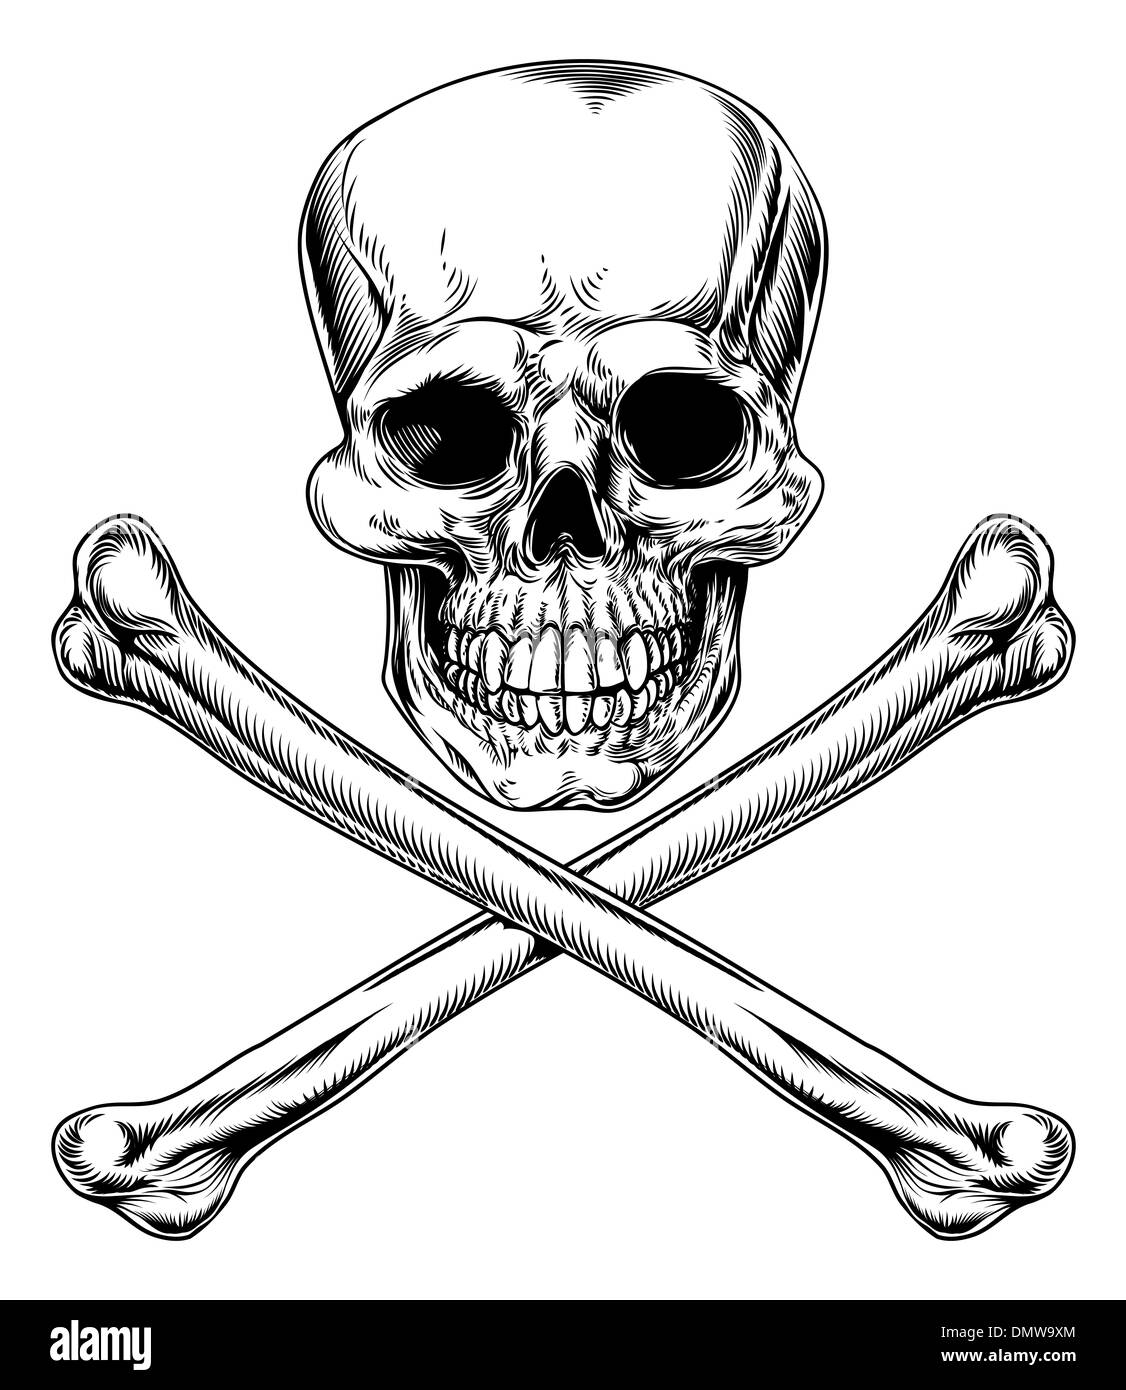 Skull and Crossbones Jolly Roger vintage pirate style sign or poison sign Stock Photo